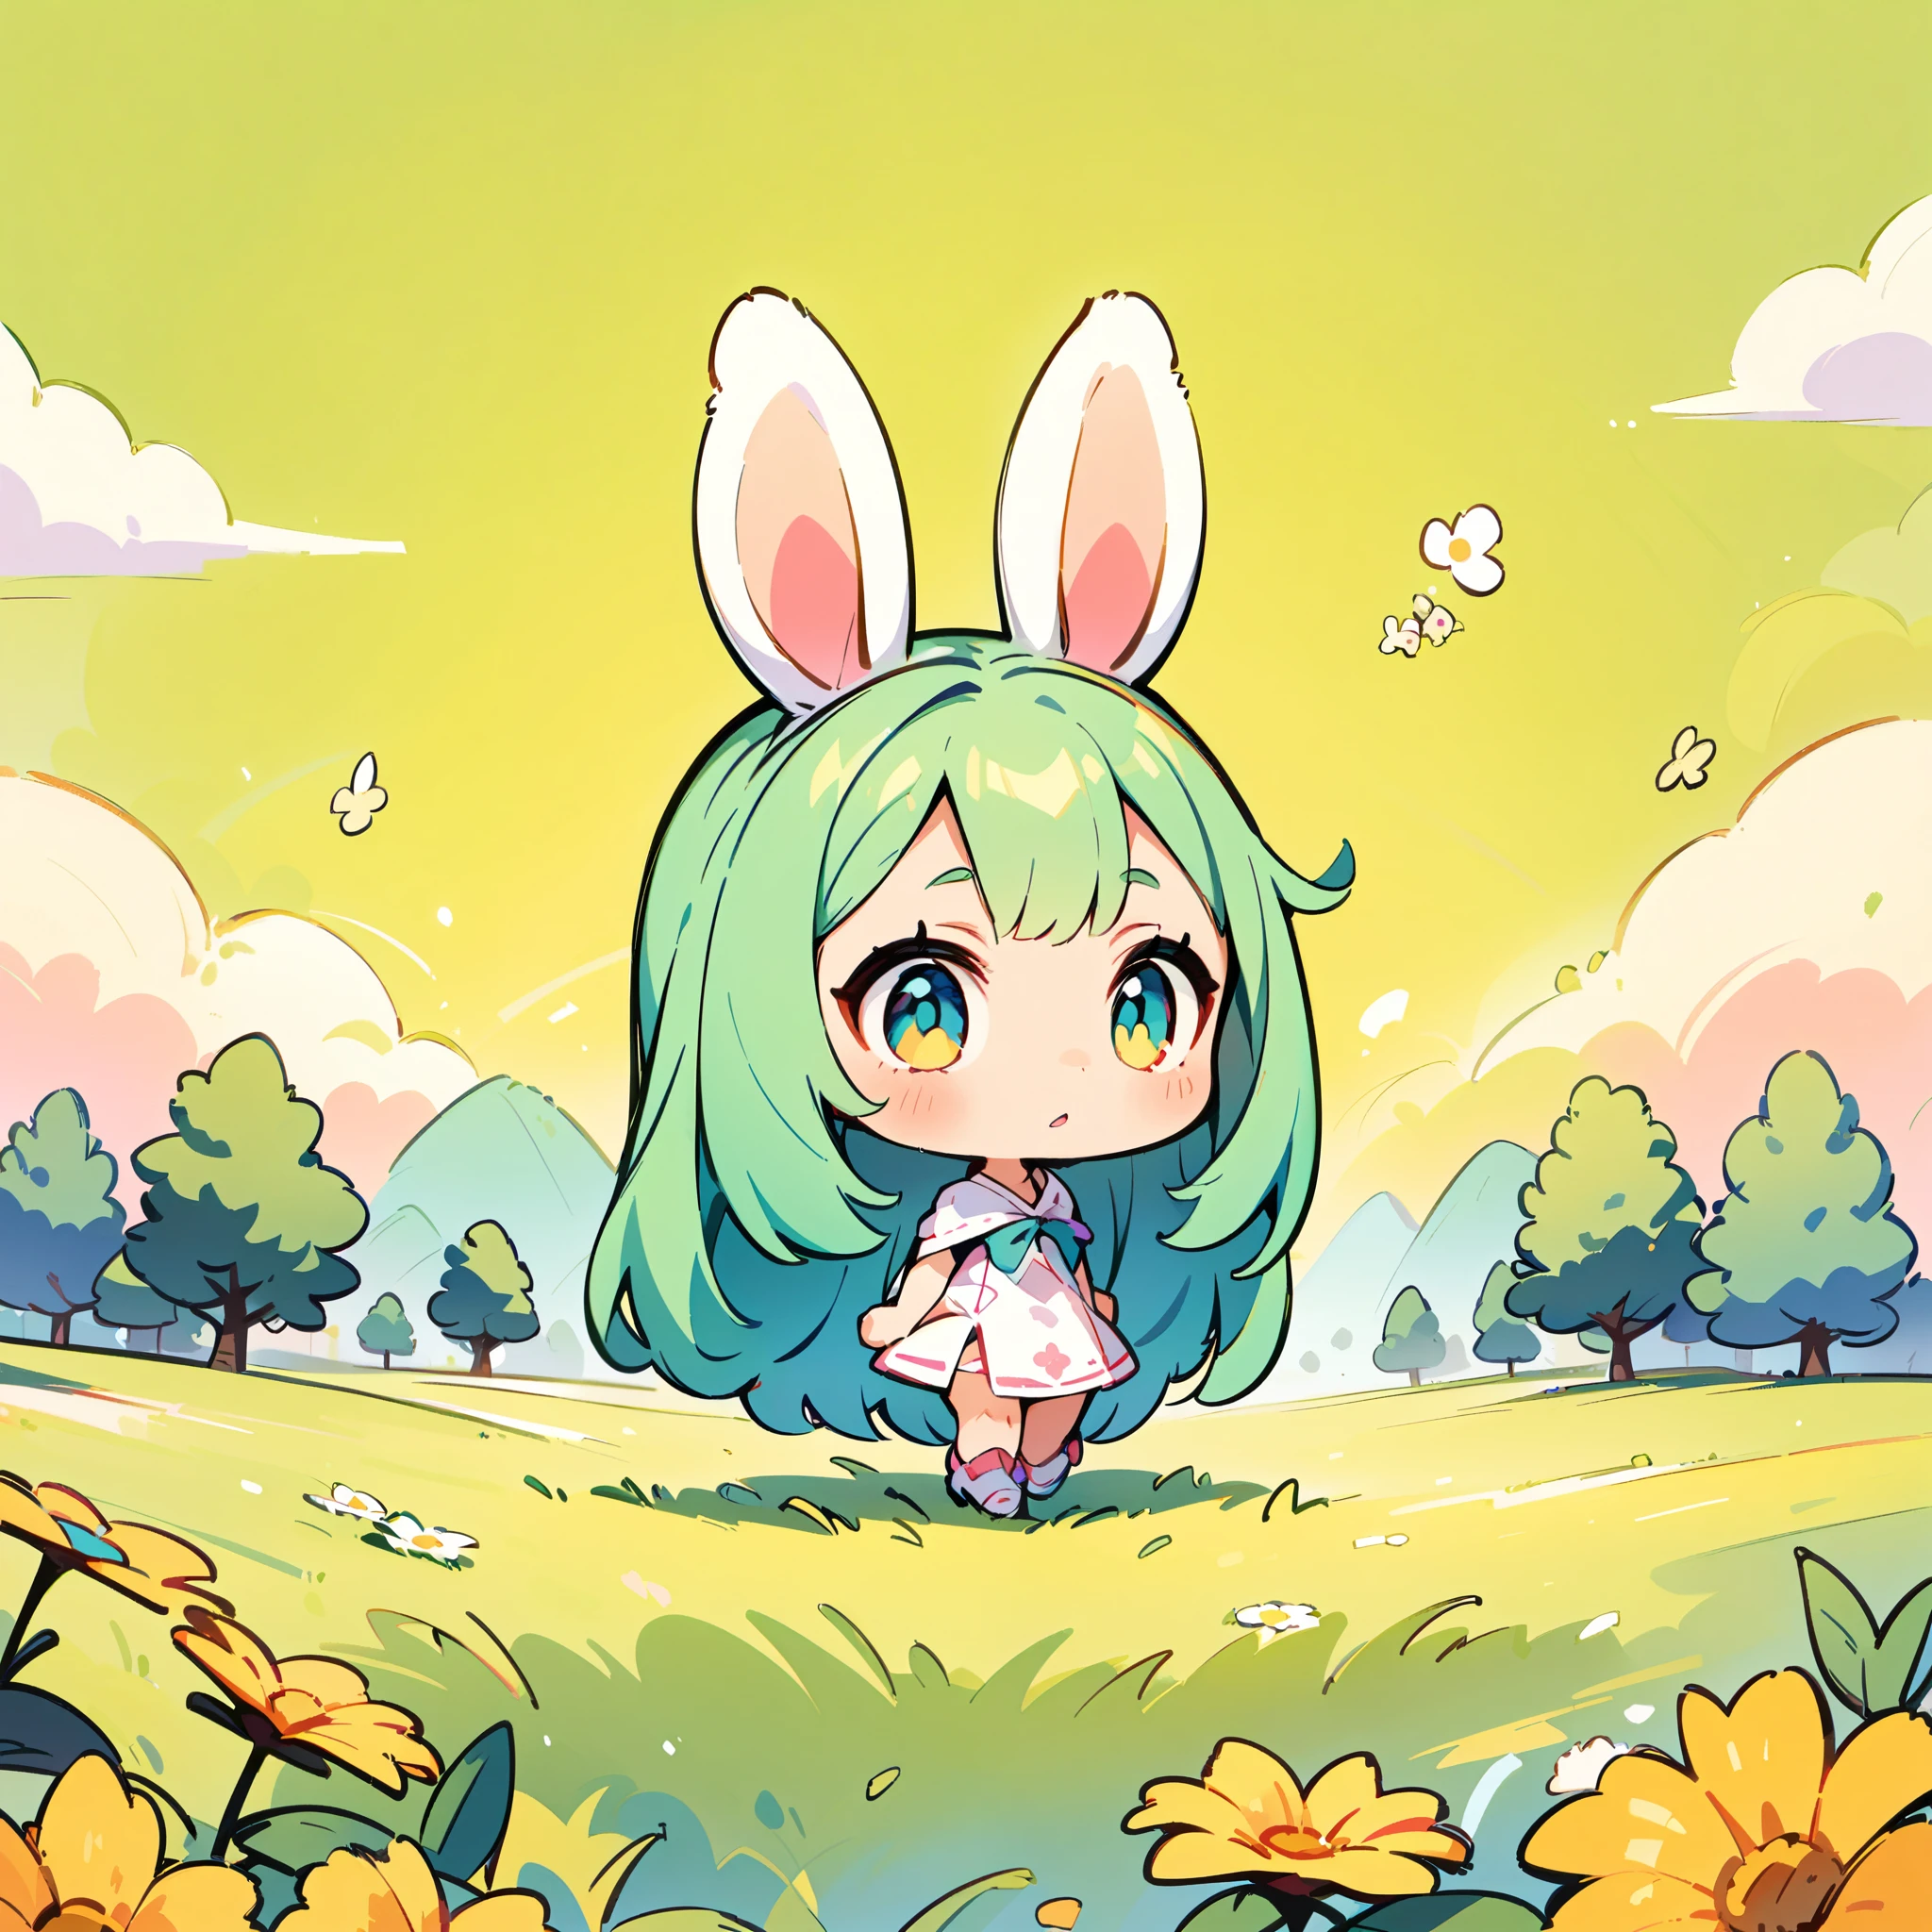 A rabbit-like person, Cute bunny woman, alone, Little, Deformation, 2 heads, Full body view, Focus on the ears, Forest and spring background, Hand-drawn illustrations.